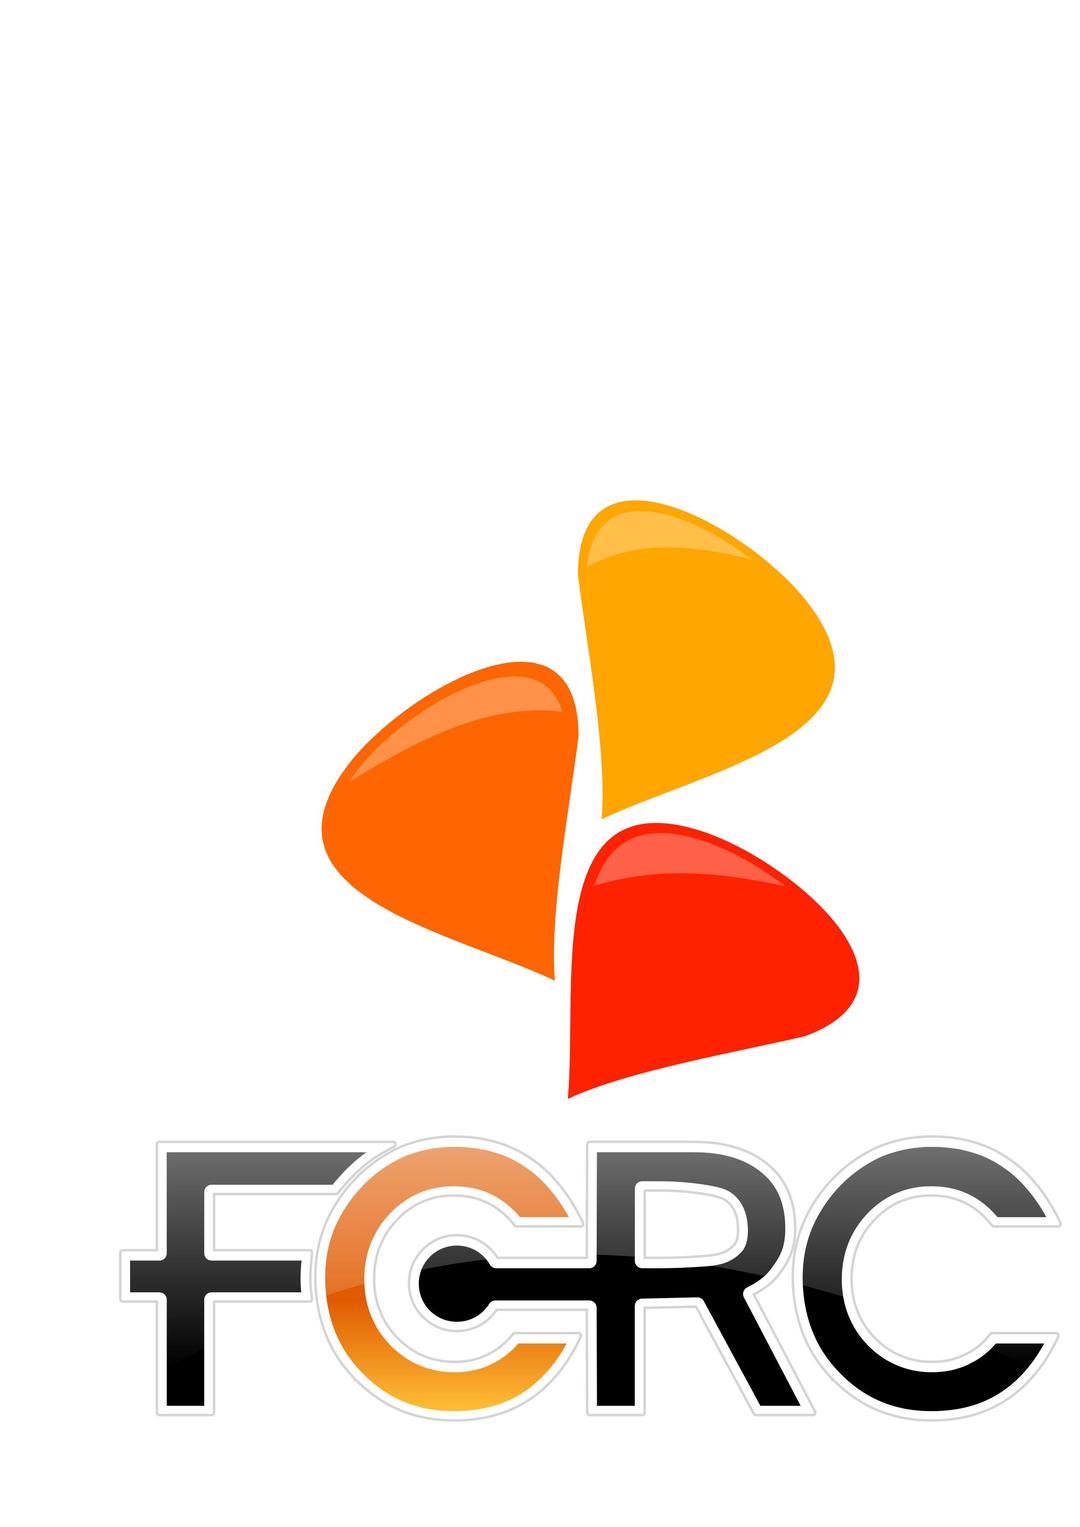 FCRC speech bubble logo and text png transparent